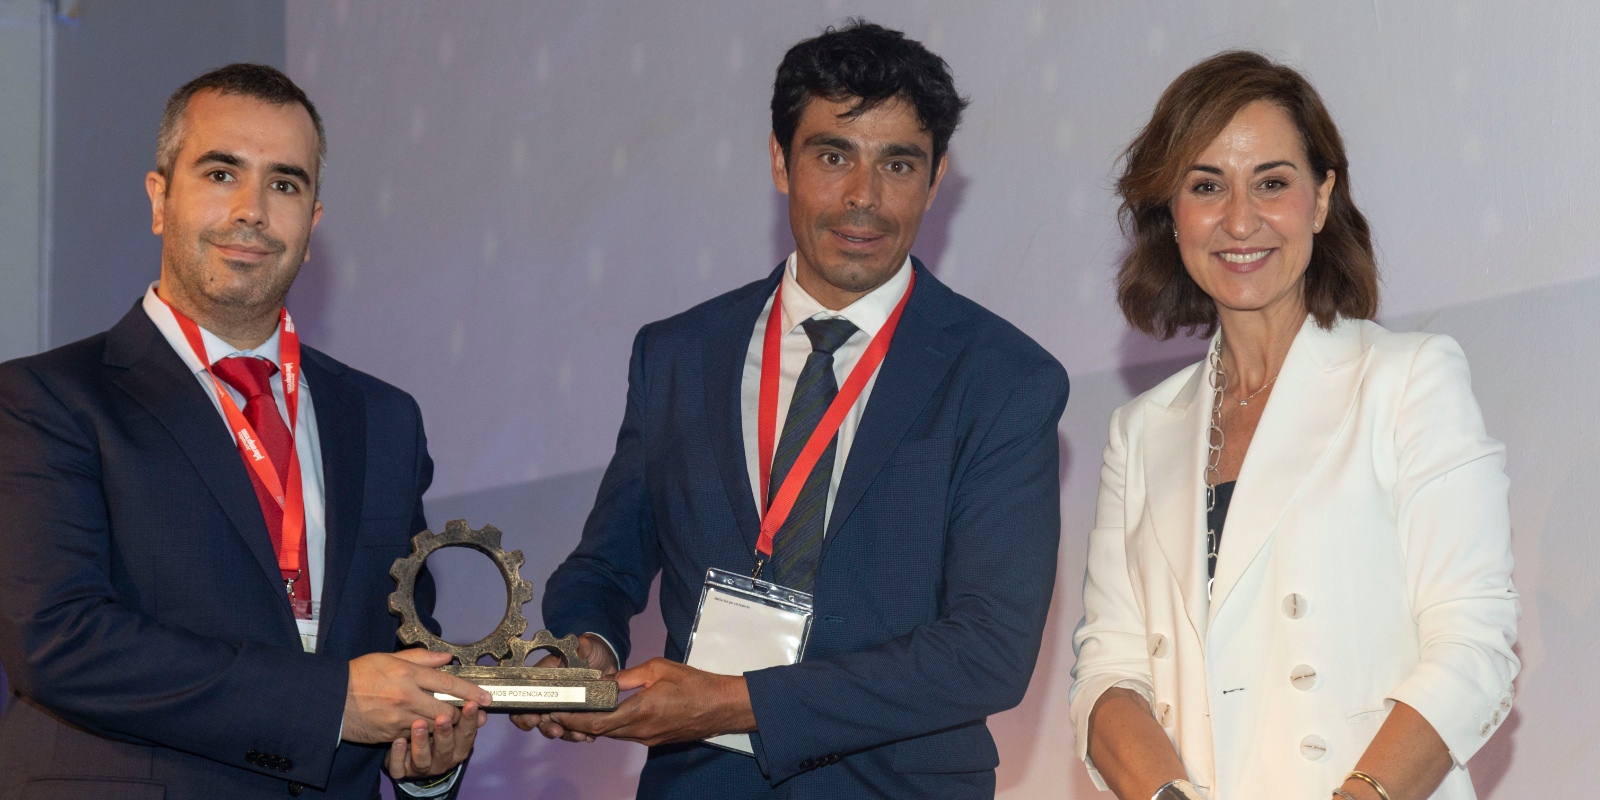 Roberto Carballo, Director of AMISA’s Railway Division and of ACCIONA’s Construction Business Works Execution Support and Equipment Management Unit, and Juan de Dios Arévalo, engineer in the company’s Railway Division Technical Office, recieving award in the Urban Works category